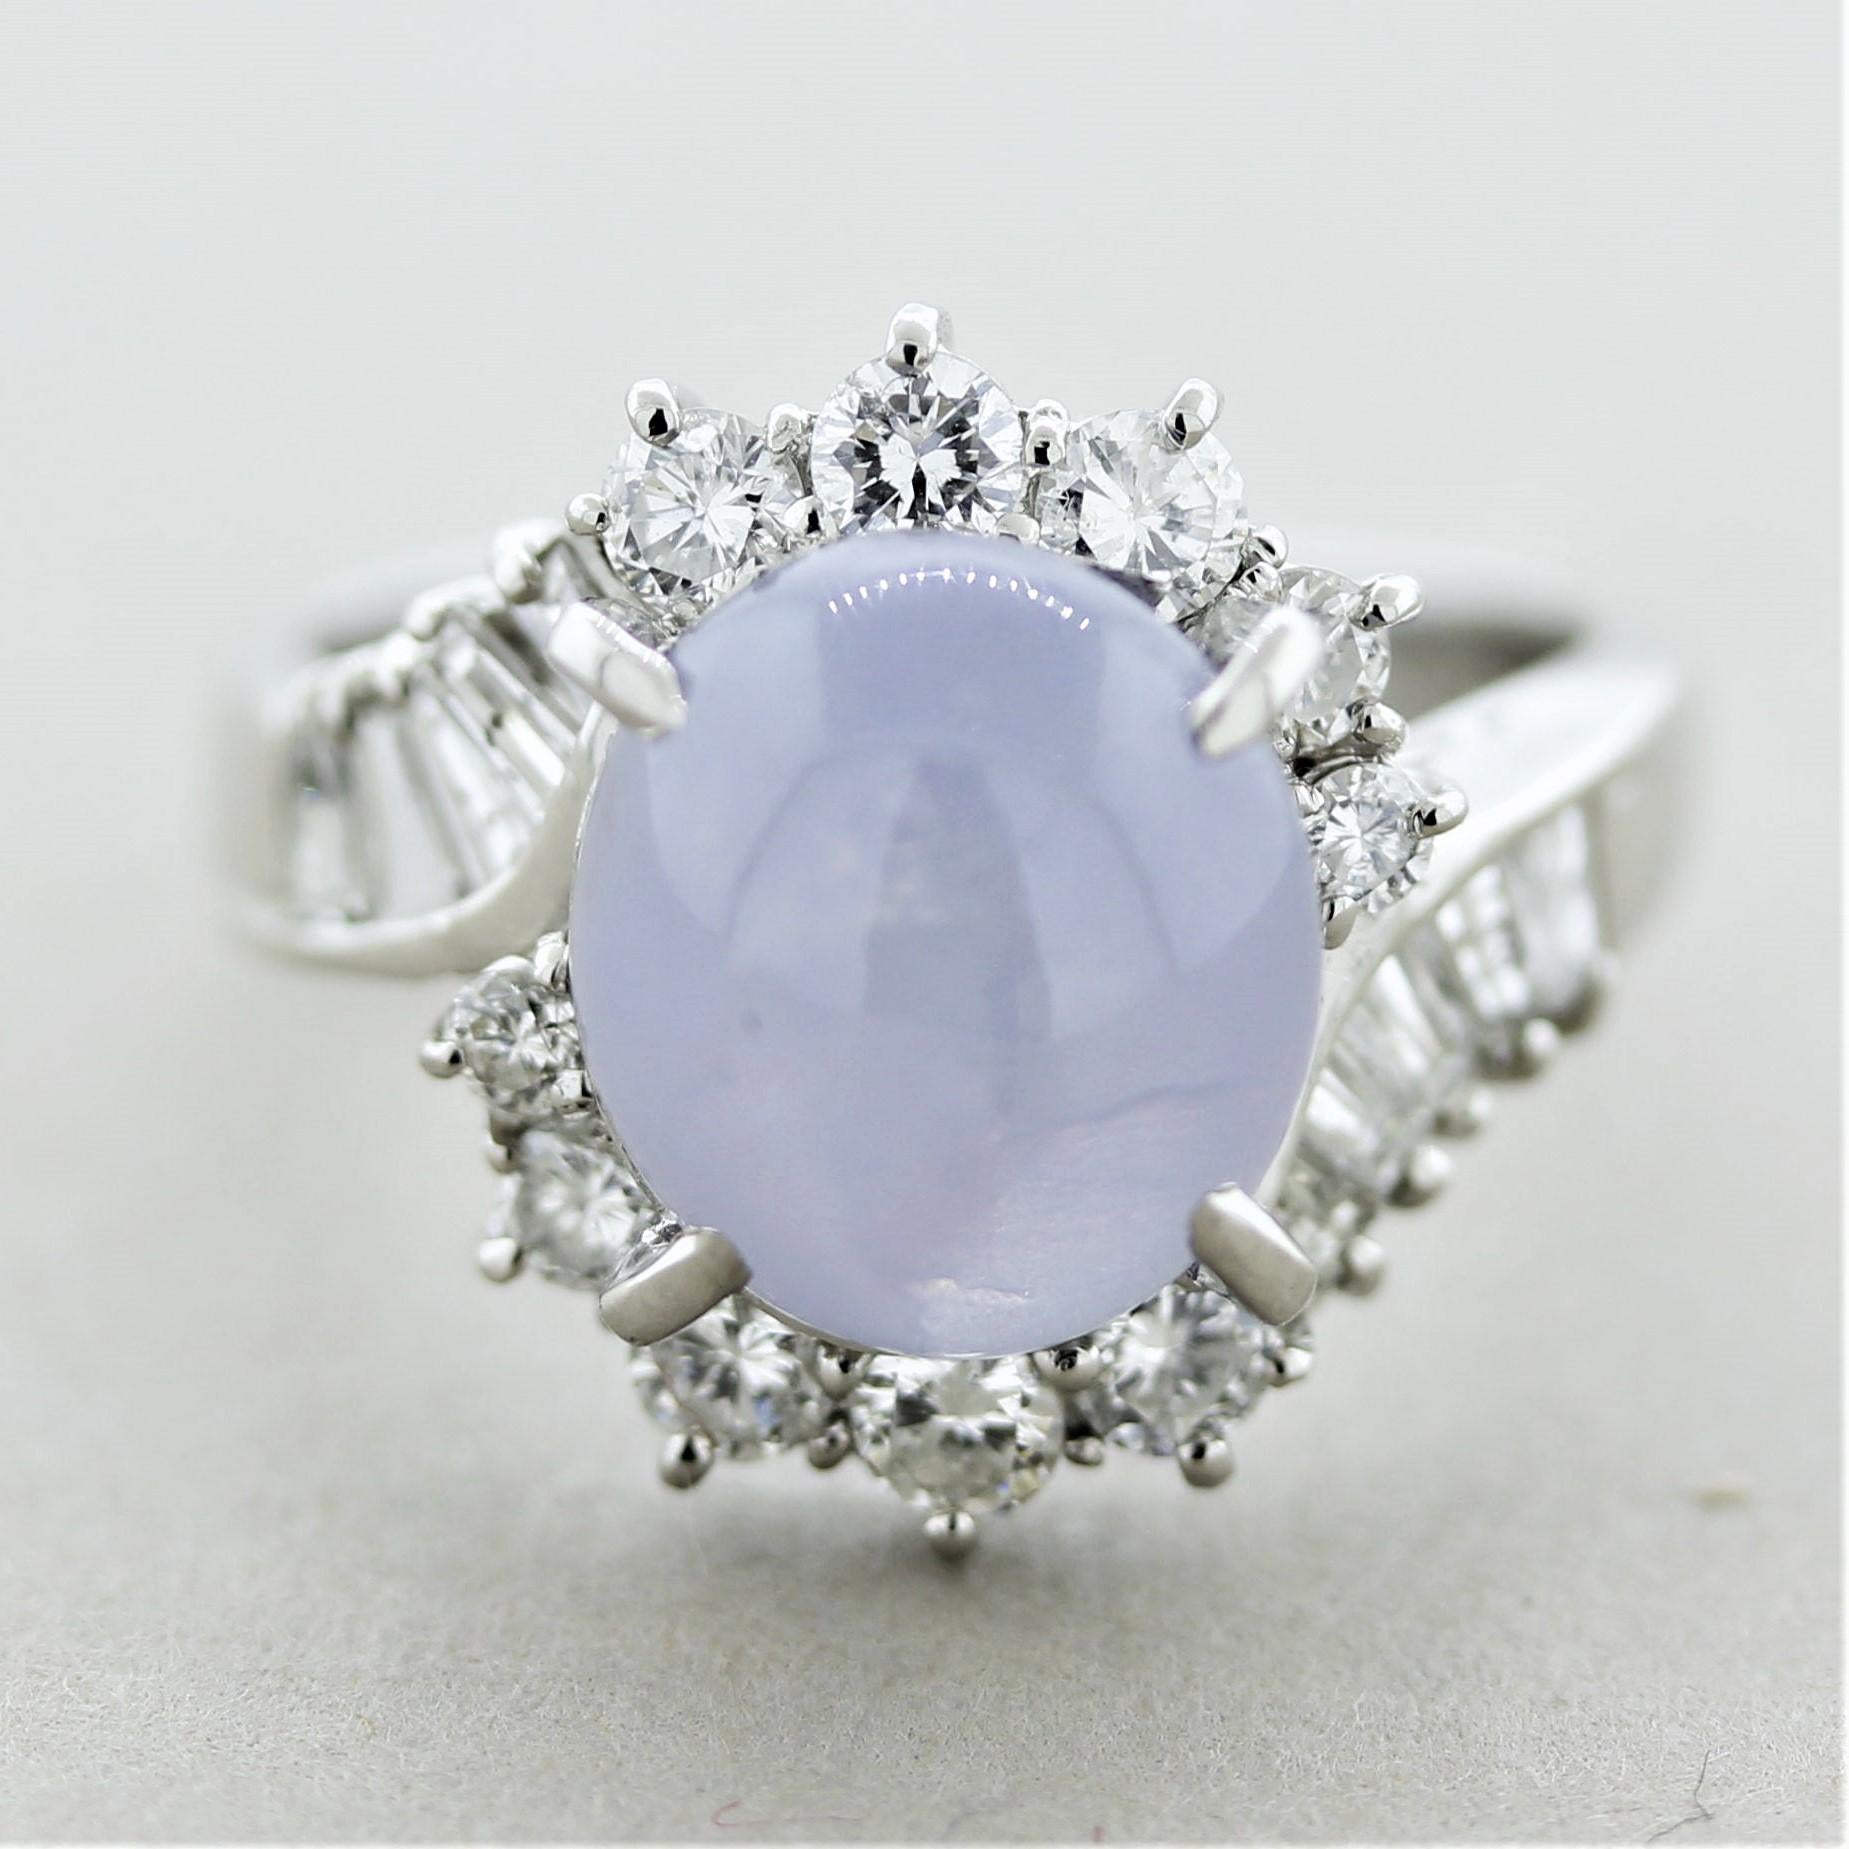 A fine star sapphire and diamond ring made in platinum. The sapphire weighs 6.03 carats and has a soft grayish-blue color. A very strong and prominent star, known as asterism, can be seen across the top of the sapphire as a light hits it or if under